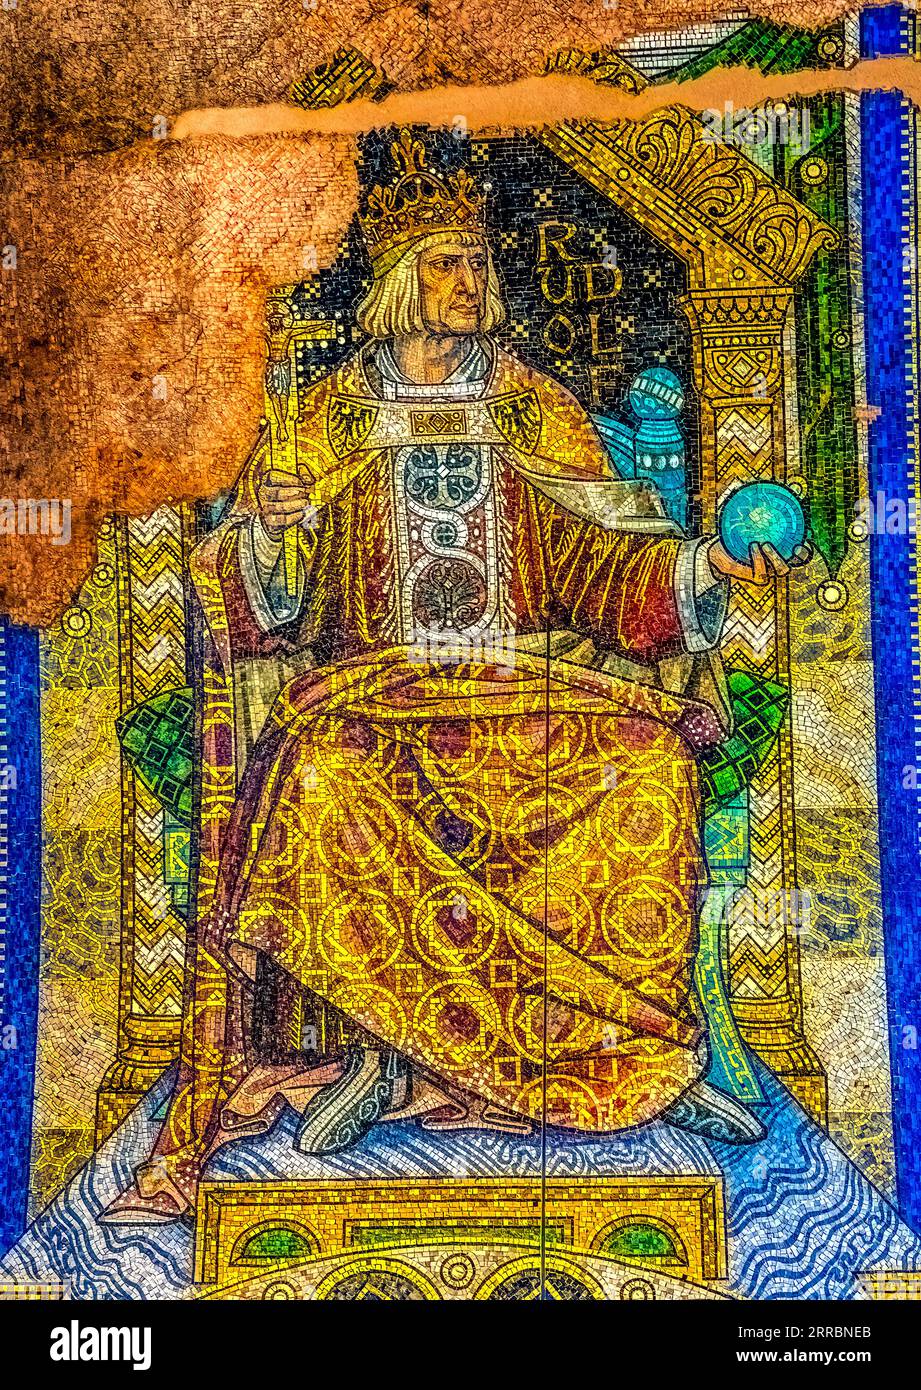 Emperor Mosaic Kaiser Wilhelm Memorial Church Gedächtniskirche Berlin Germany. Mosaic and Church built in 1890s, bombed in 1943. Chruch and Mosaic res Stock Photo